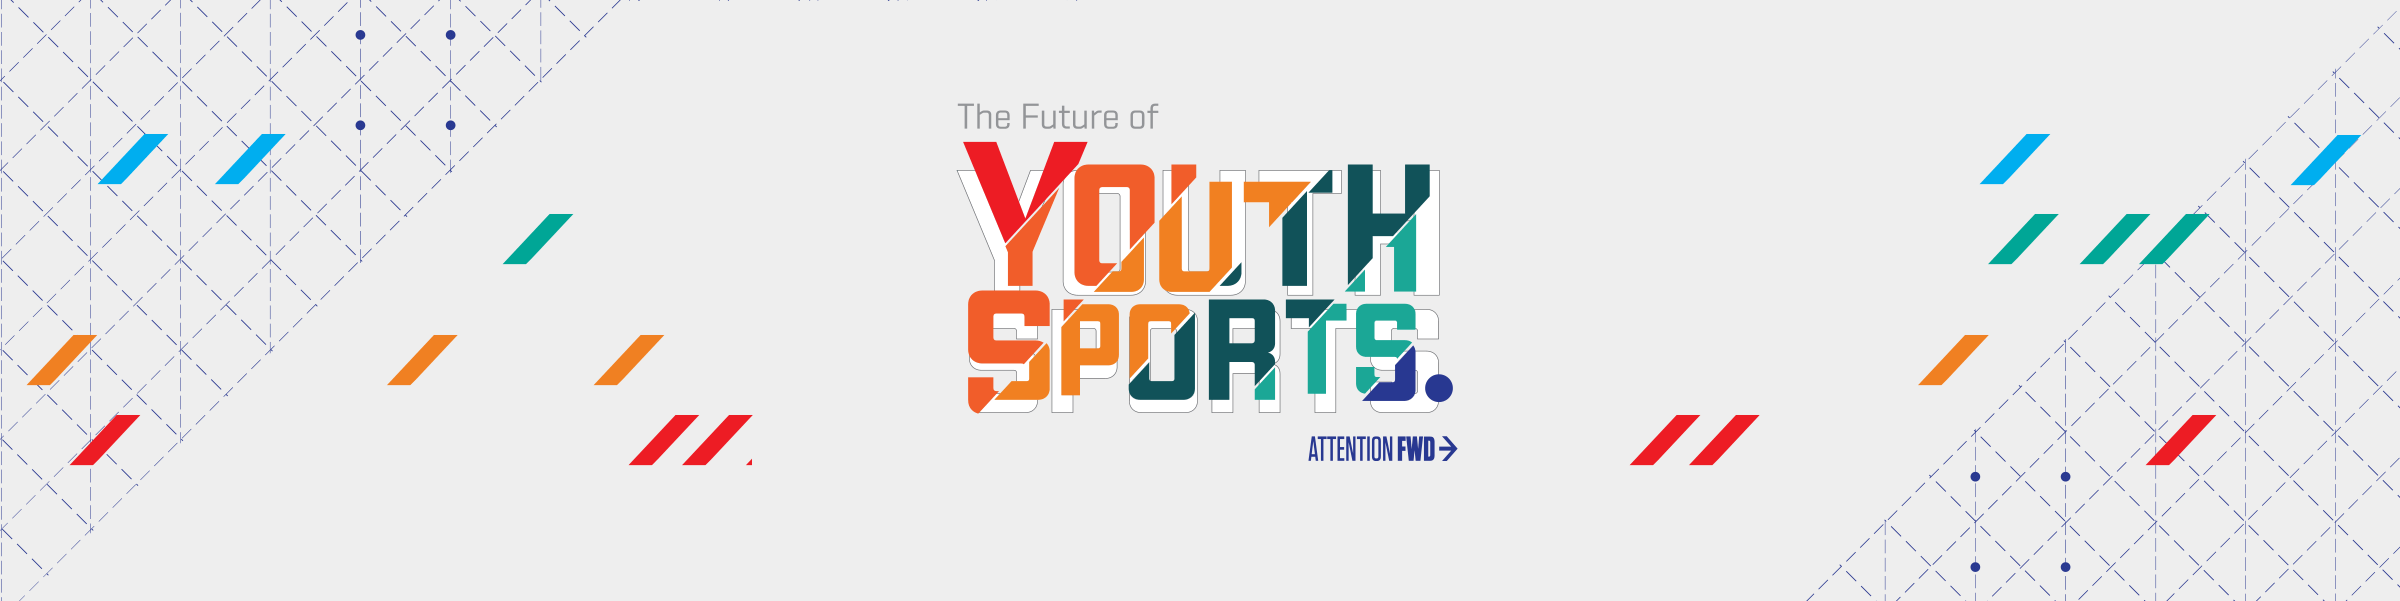 The Future of Youth Sports